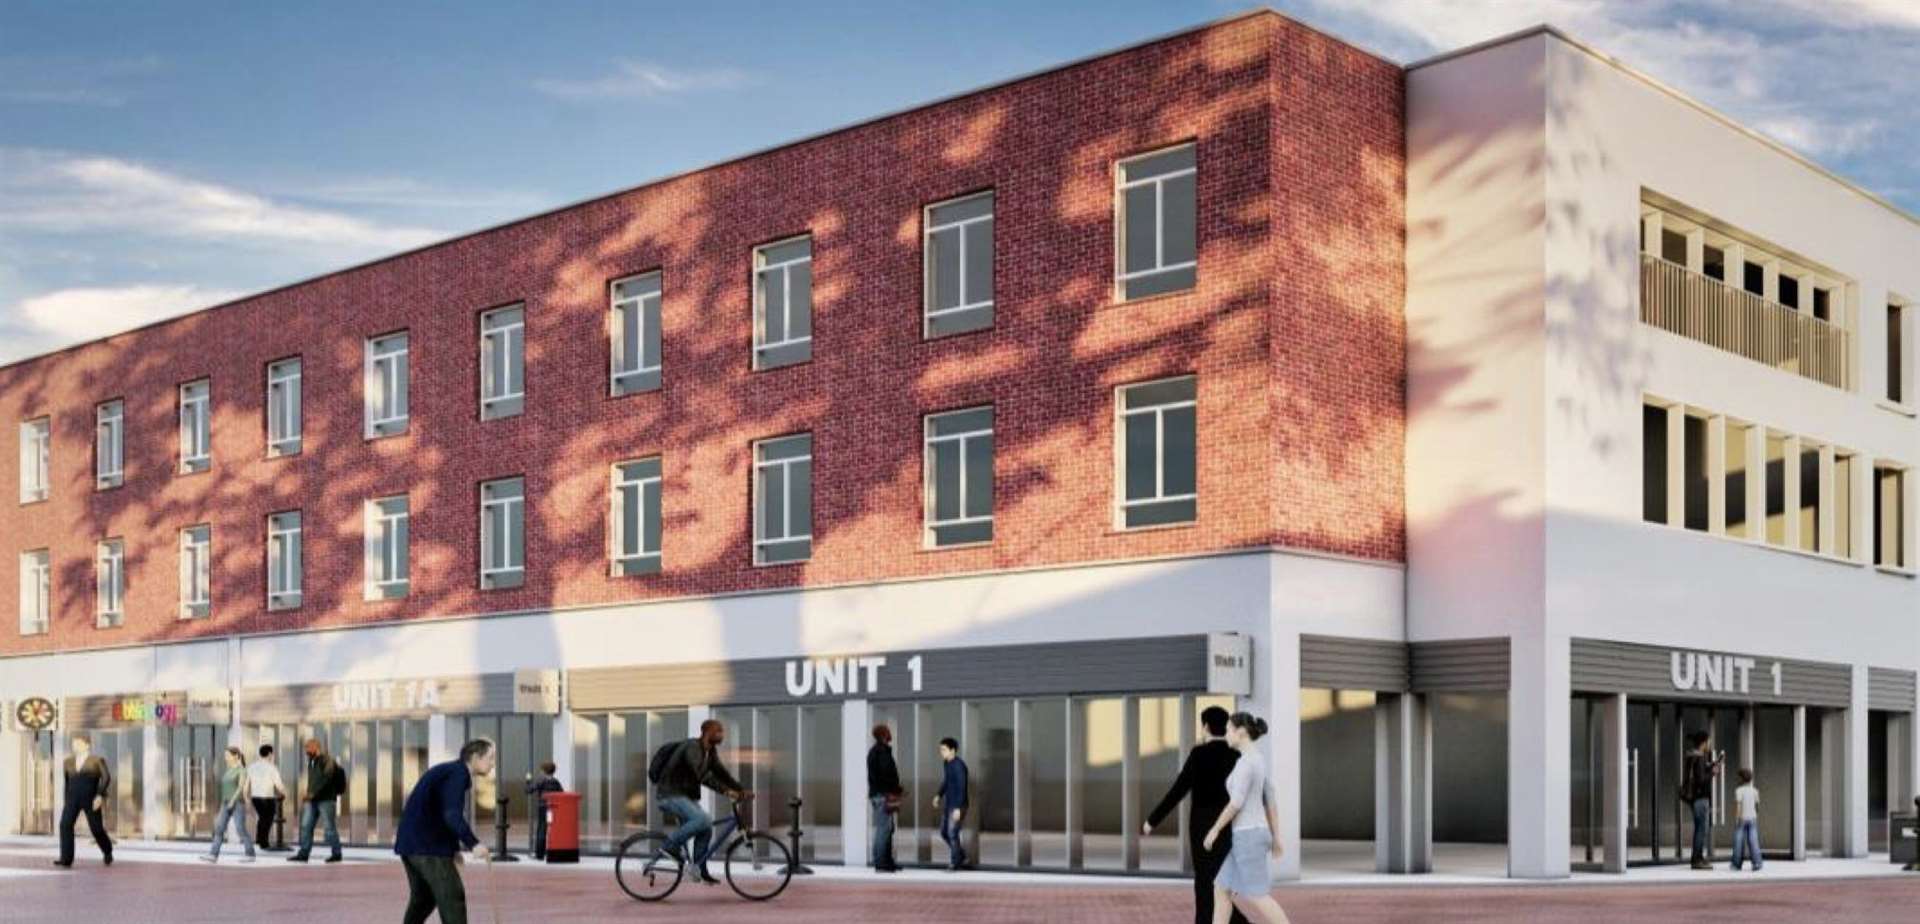 How the Burton/Dorothy Perkins building in Canterbury could look. Picture: Completely Retail/Smith Price RRG